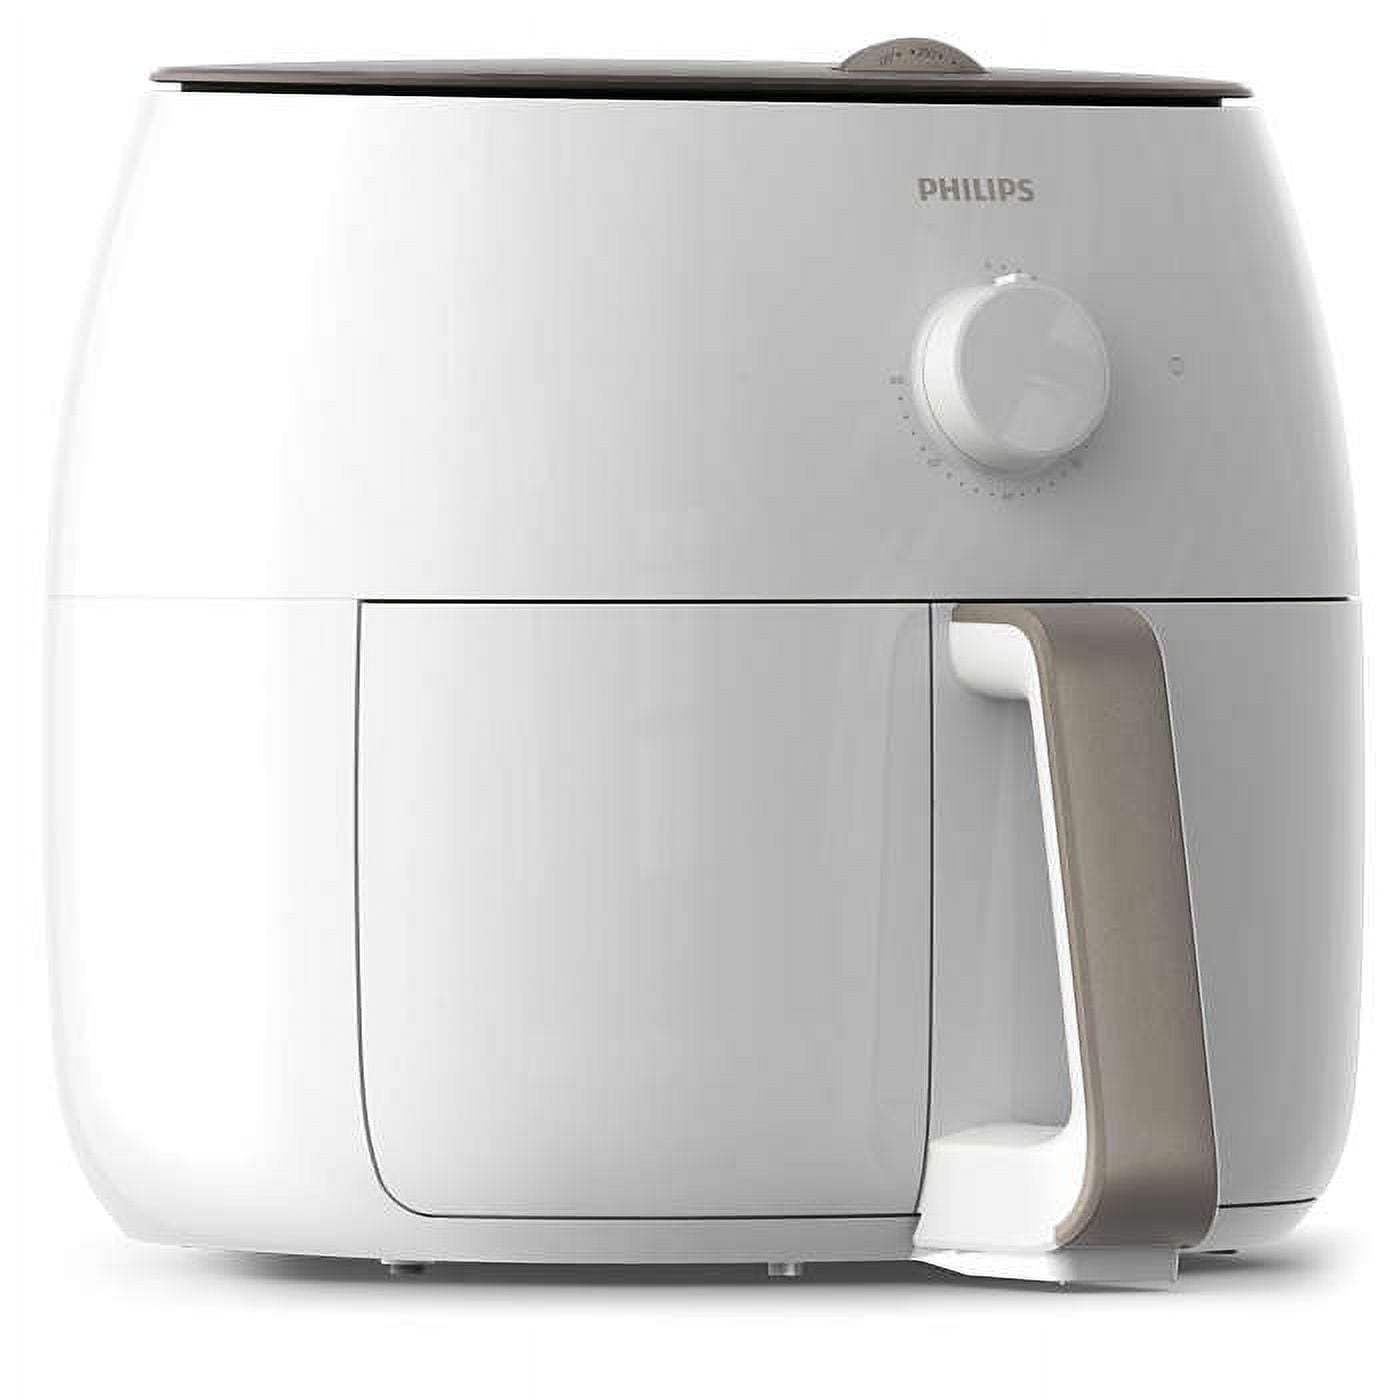 Philips Air Fryer Viva Collection - Adjustable Temperature Control up to  390 Degrees, Dishwasher-Safe - White Silk 